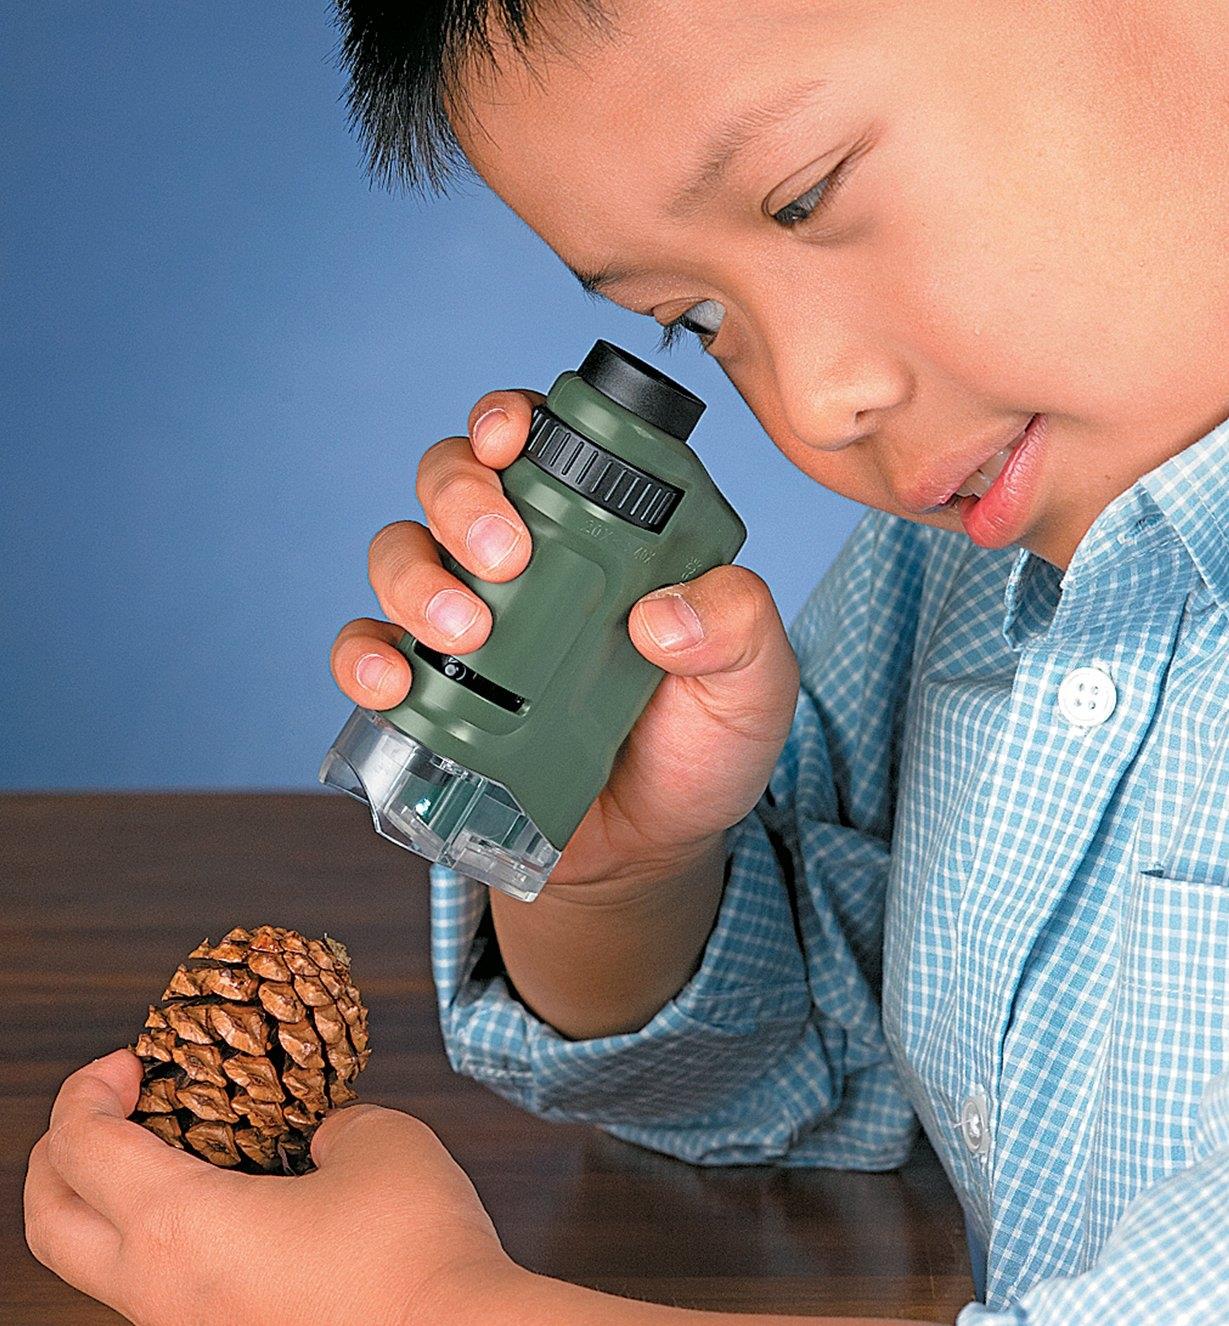 A child uses the Pocket Microscope to look at a pine cone